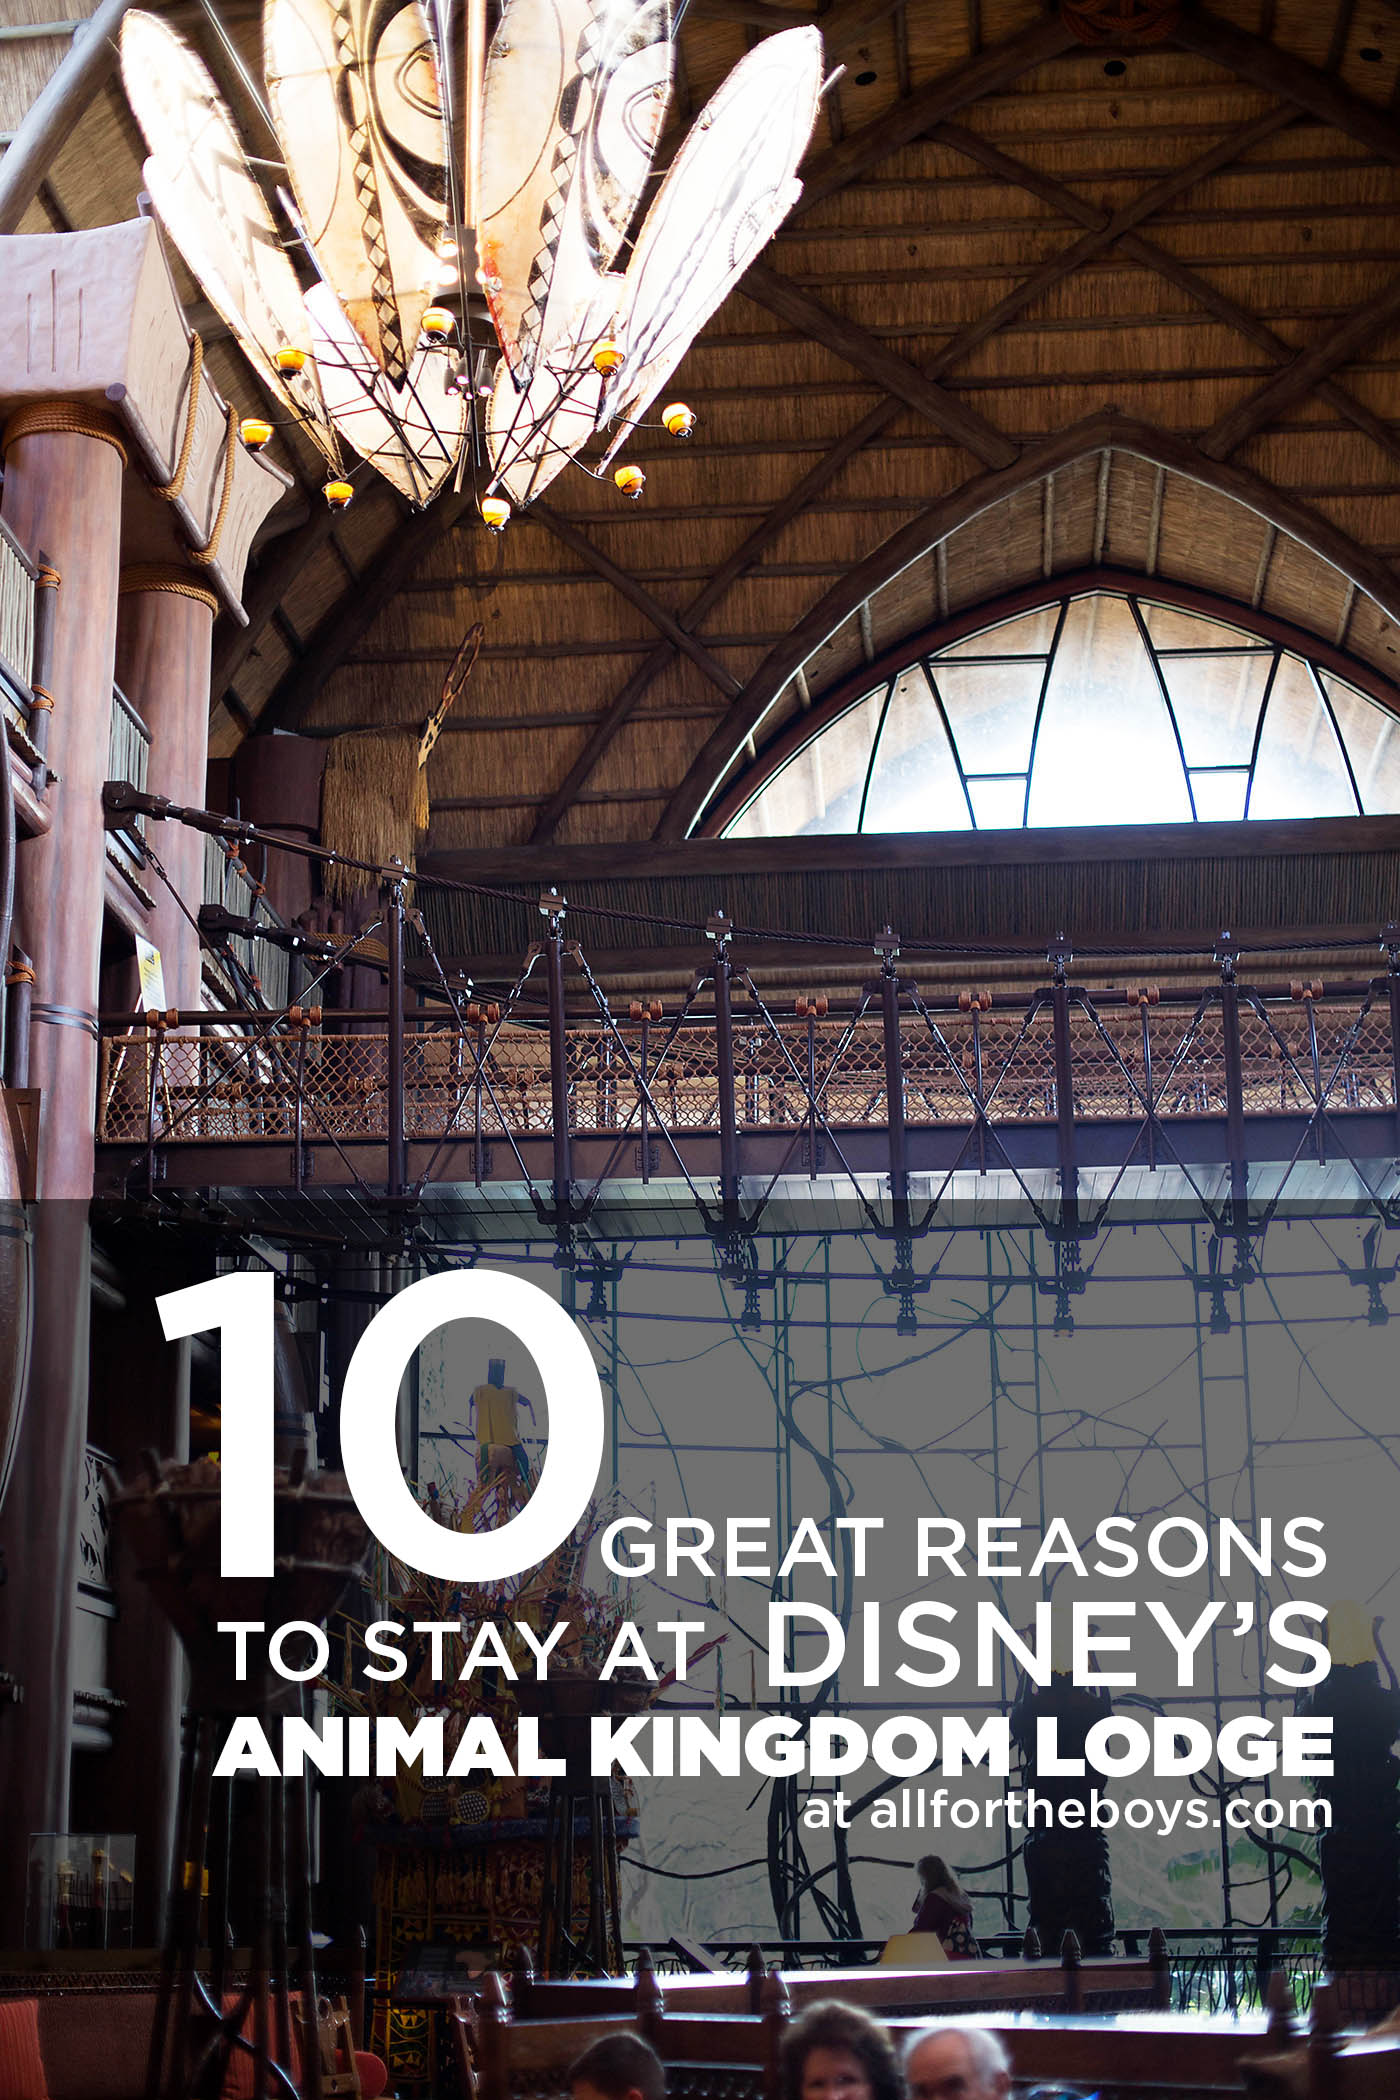 10 reasons to stay at Disney's Animal Kingdom Lodge #ZootopiaEvent